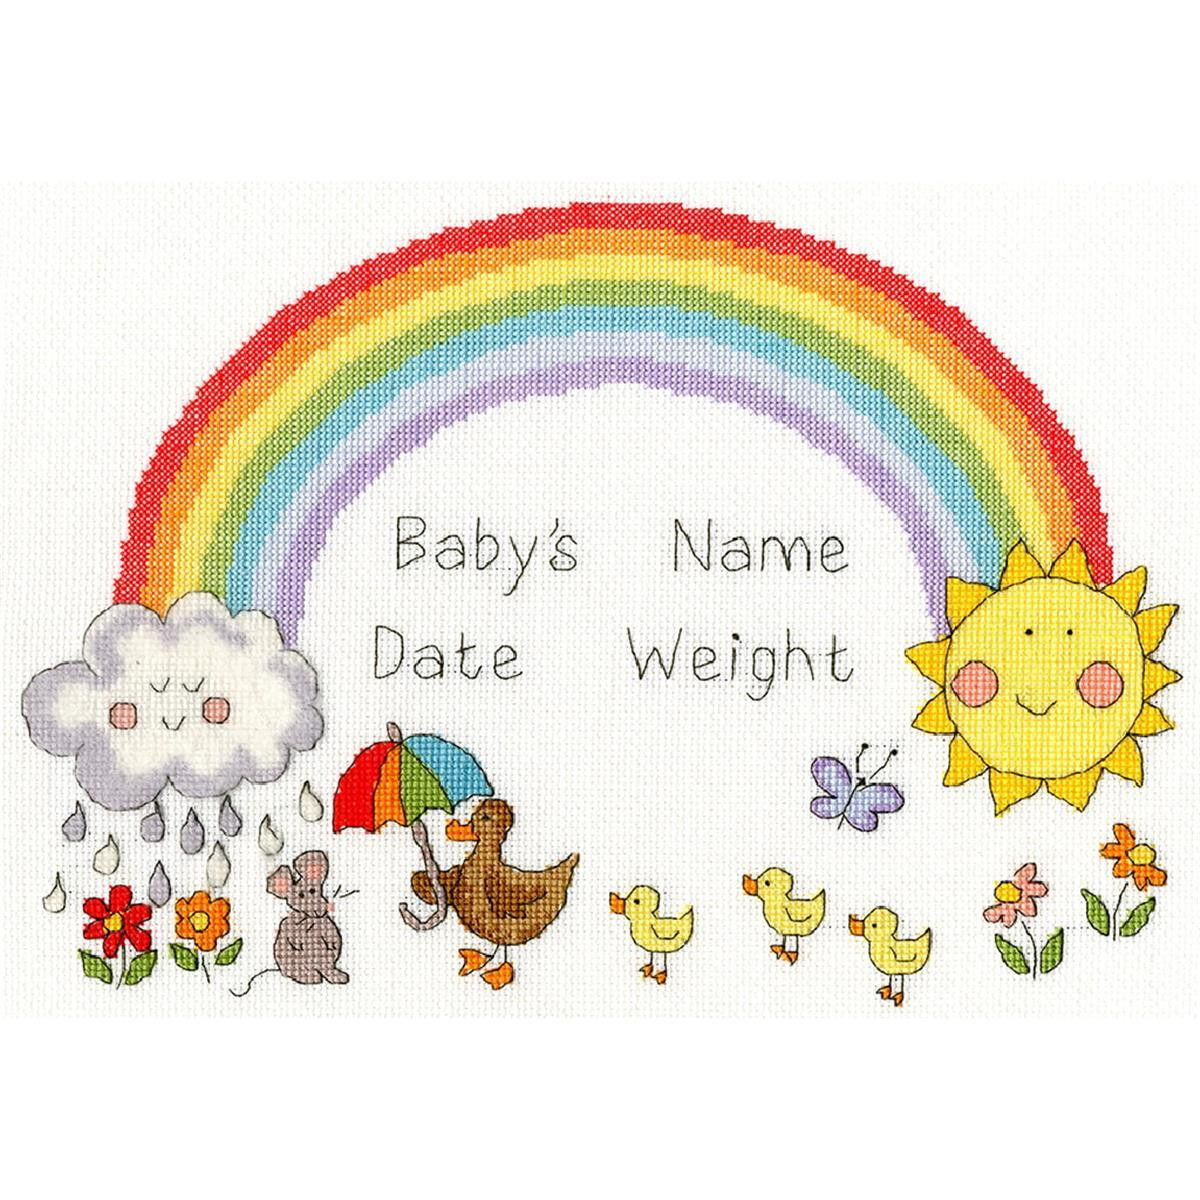 A cheerful embroidery design features a colorful rainbow...